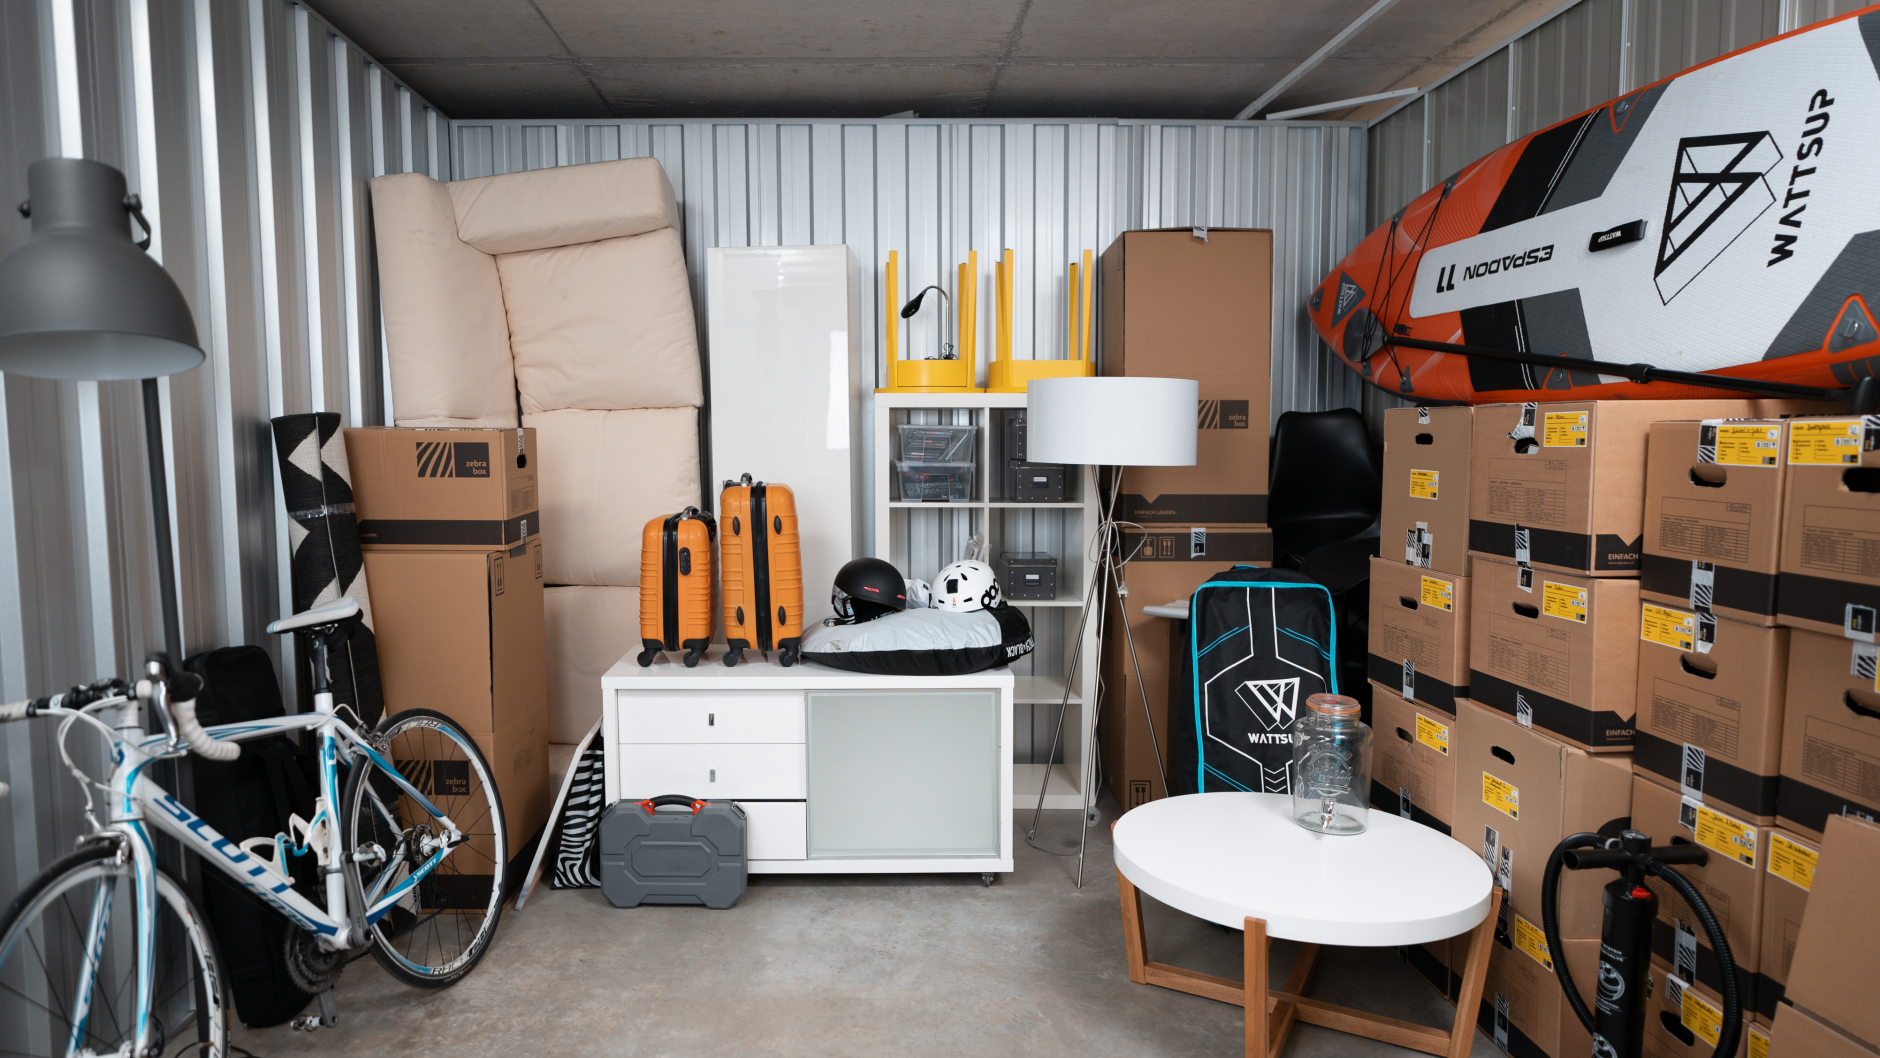 A Zebrabox storage unit filled with household goods, moving boxes and sports equipment.